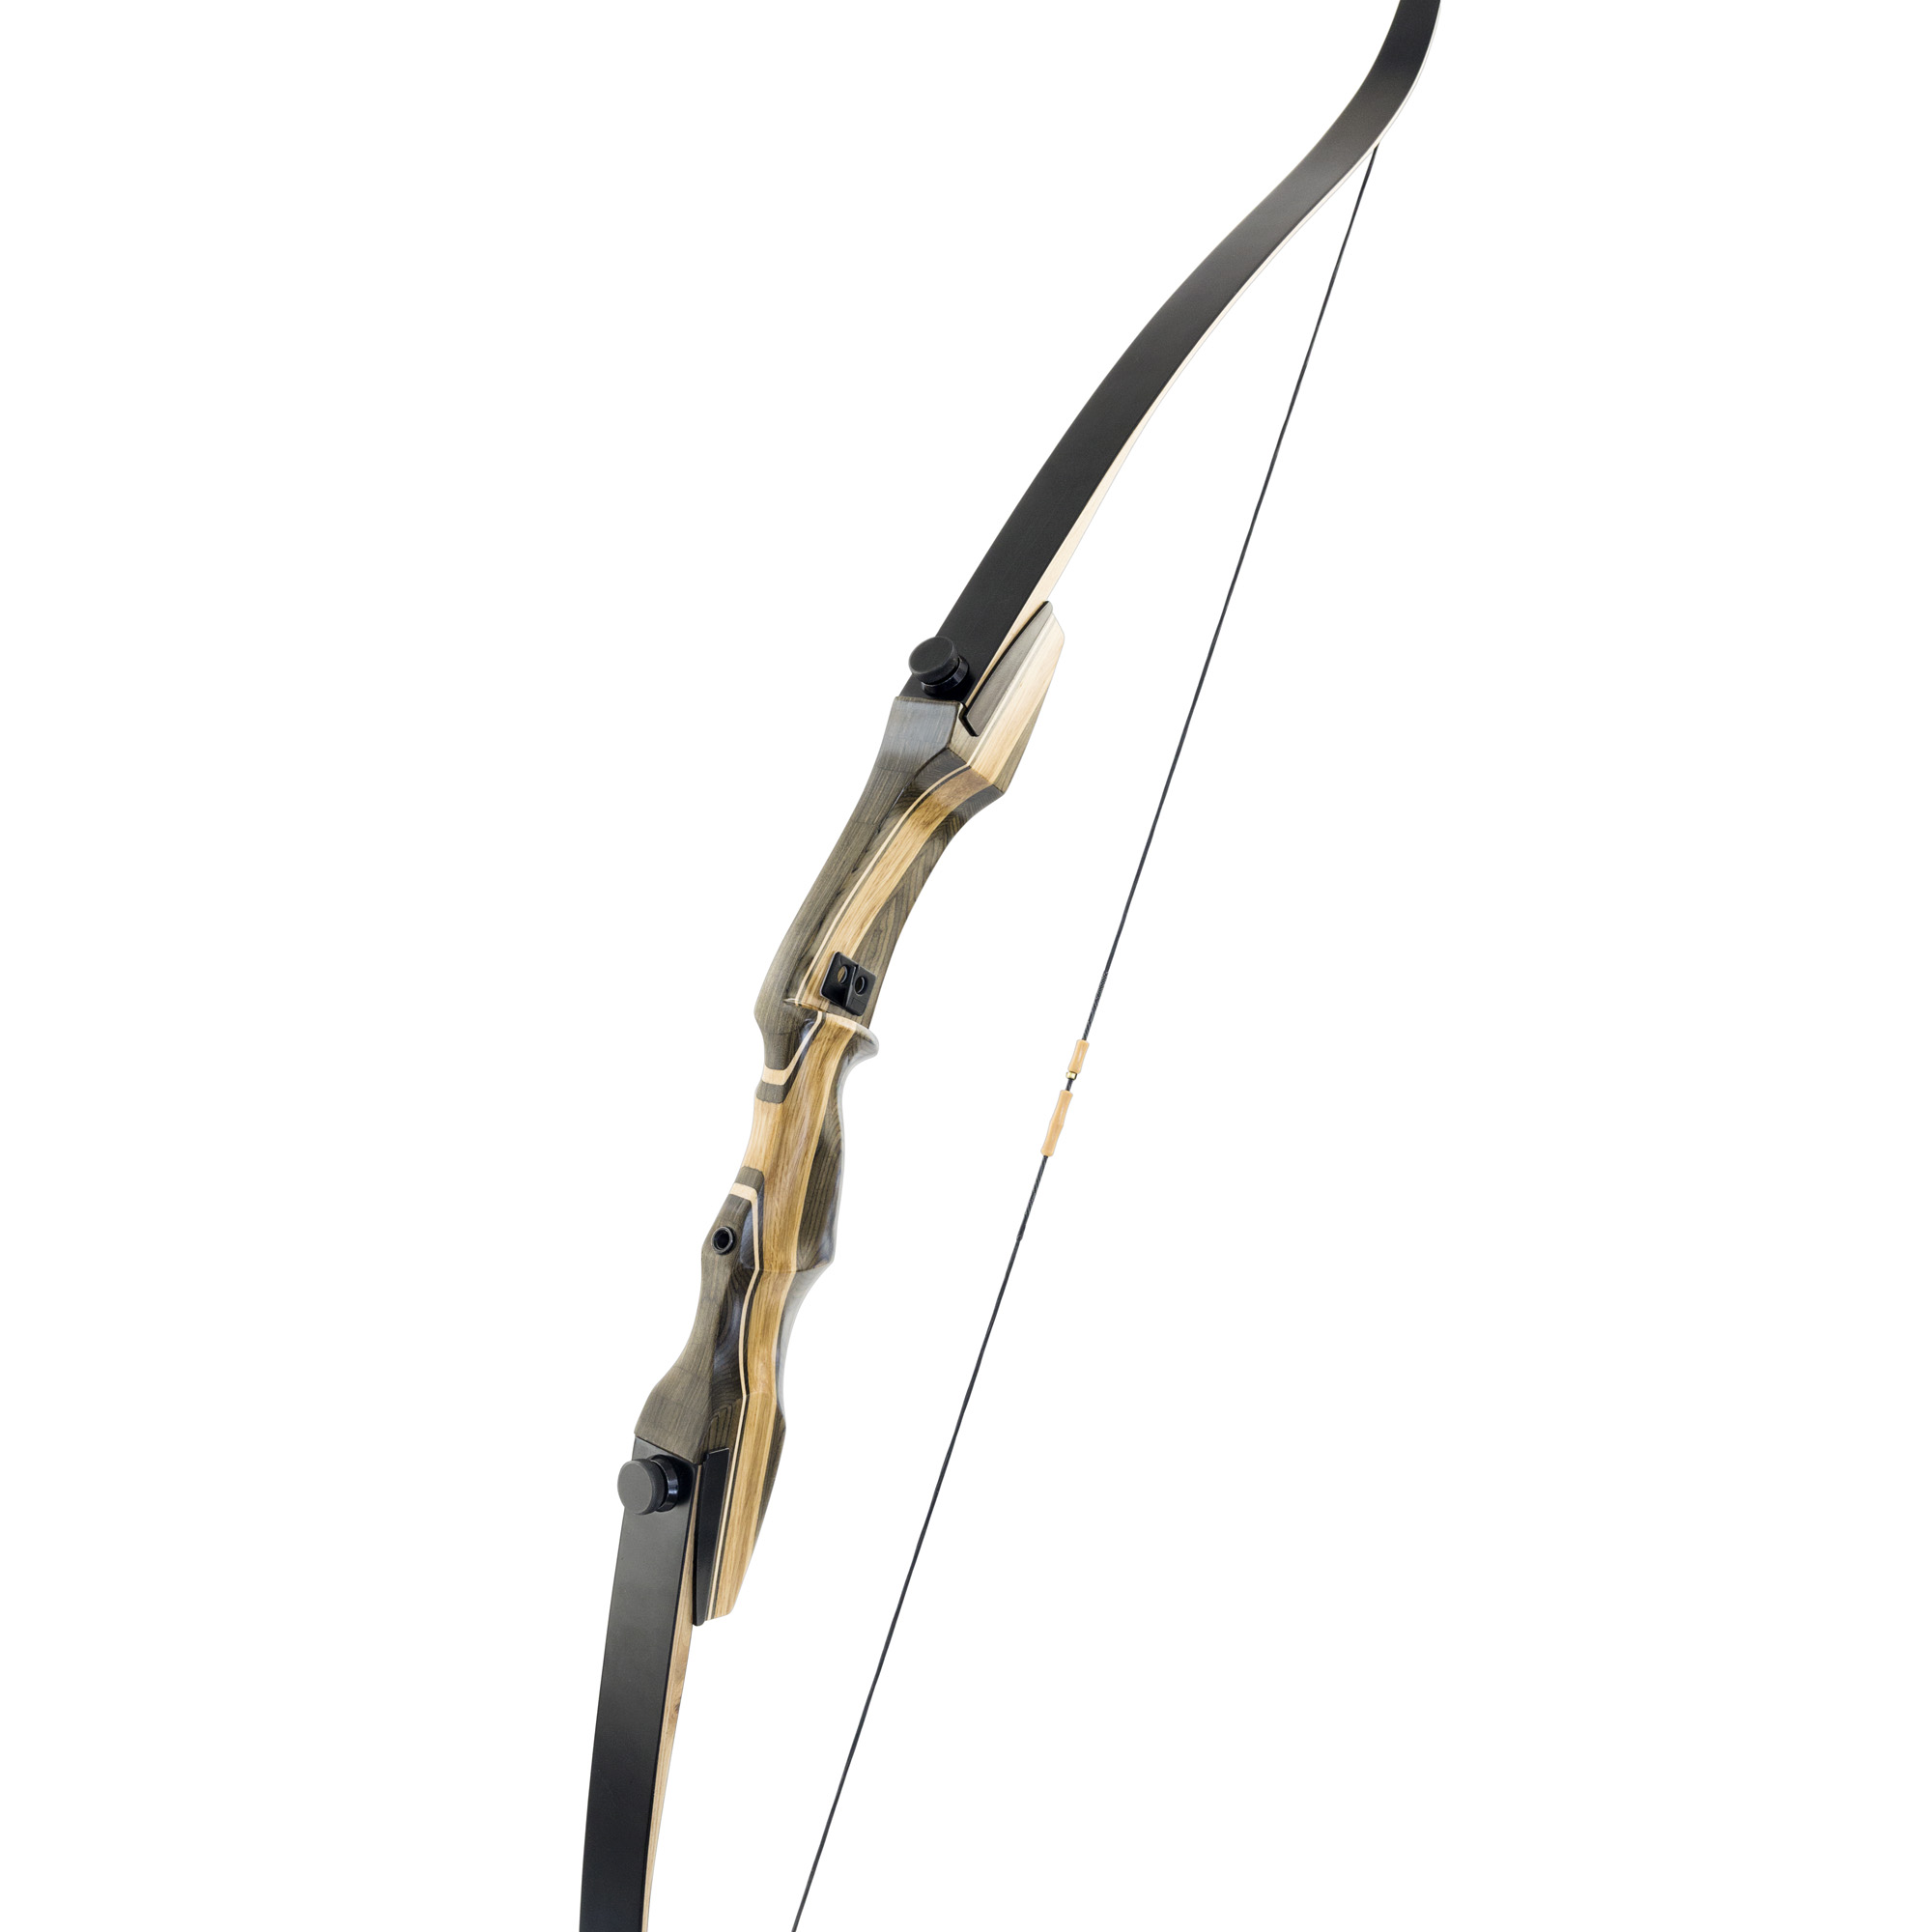 Details about   60" Recurve Bow 20lb with ILF Limbs Archery Beginner Hunting Shooting Practise 